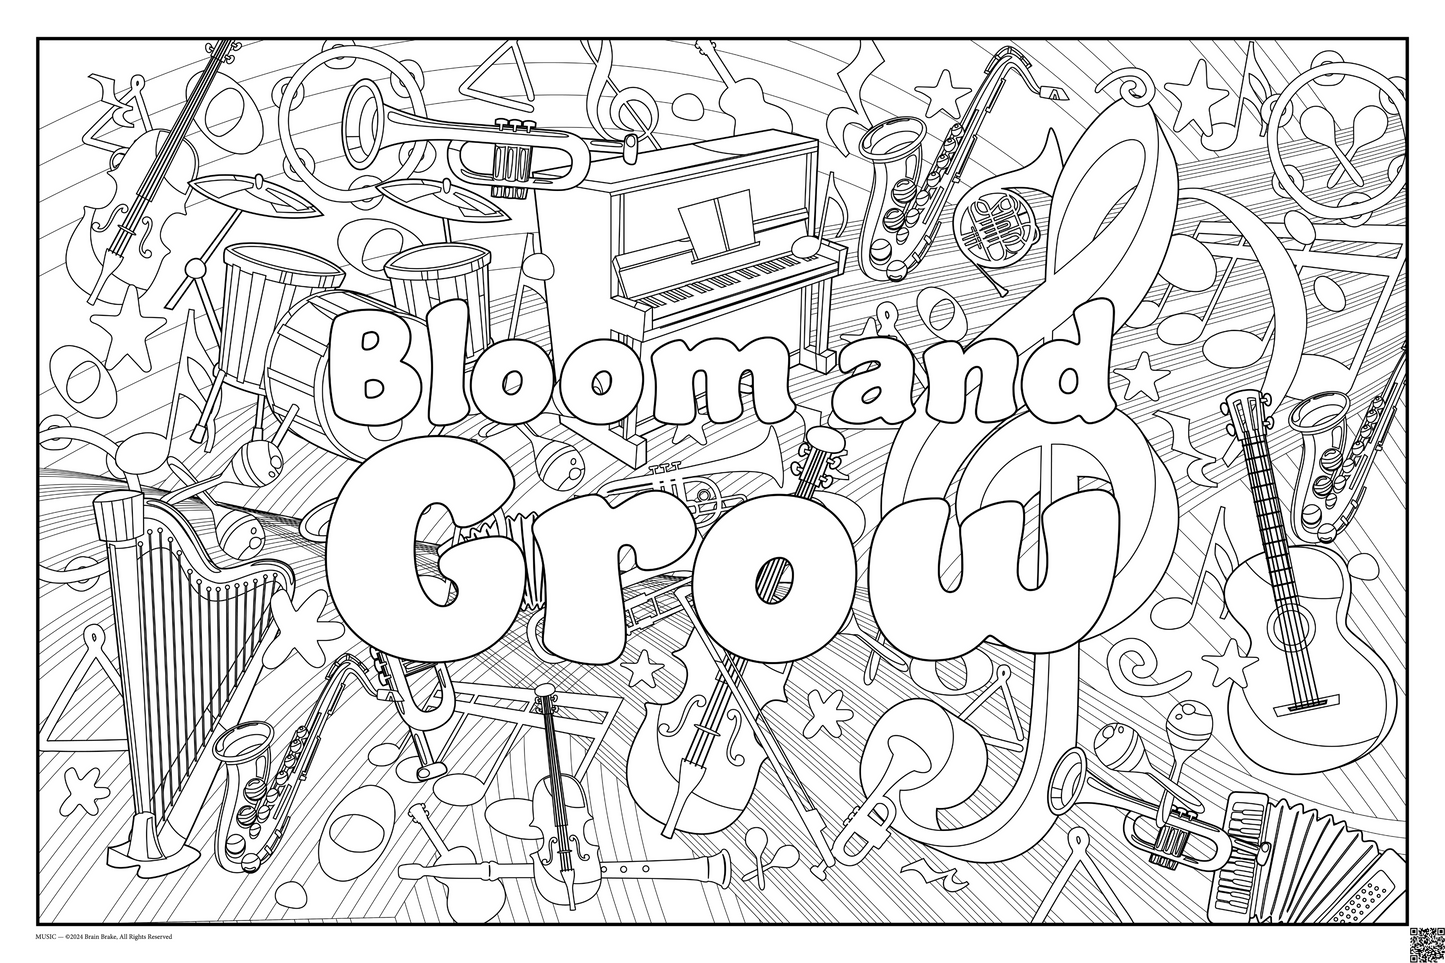 Build Community: Bloom and Grow